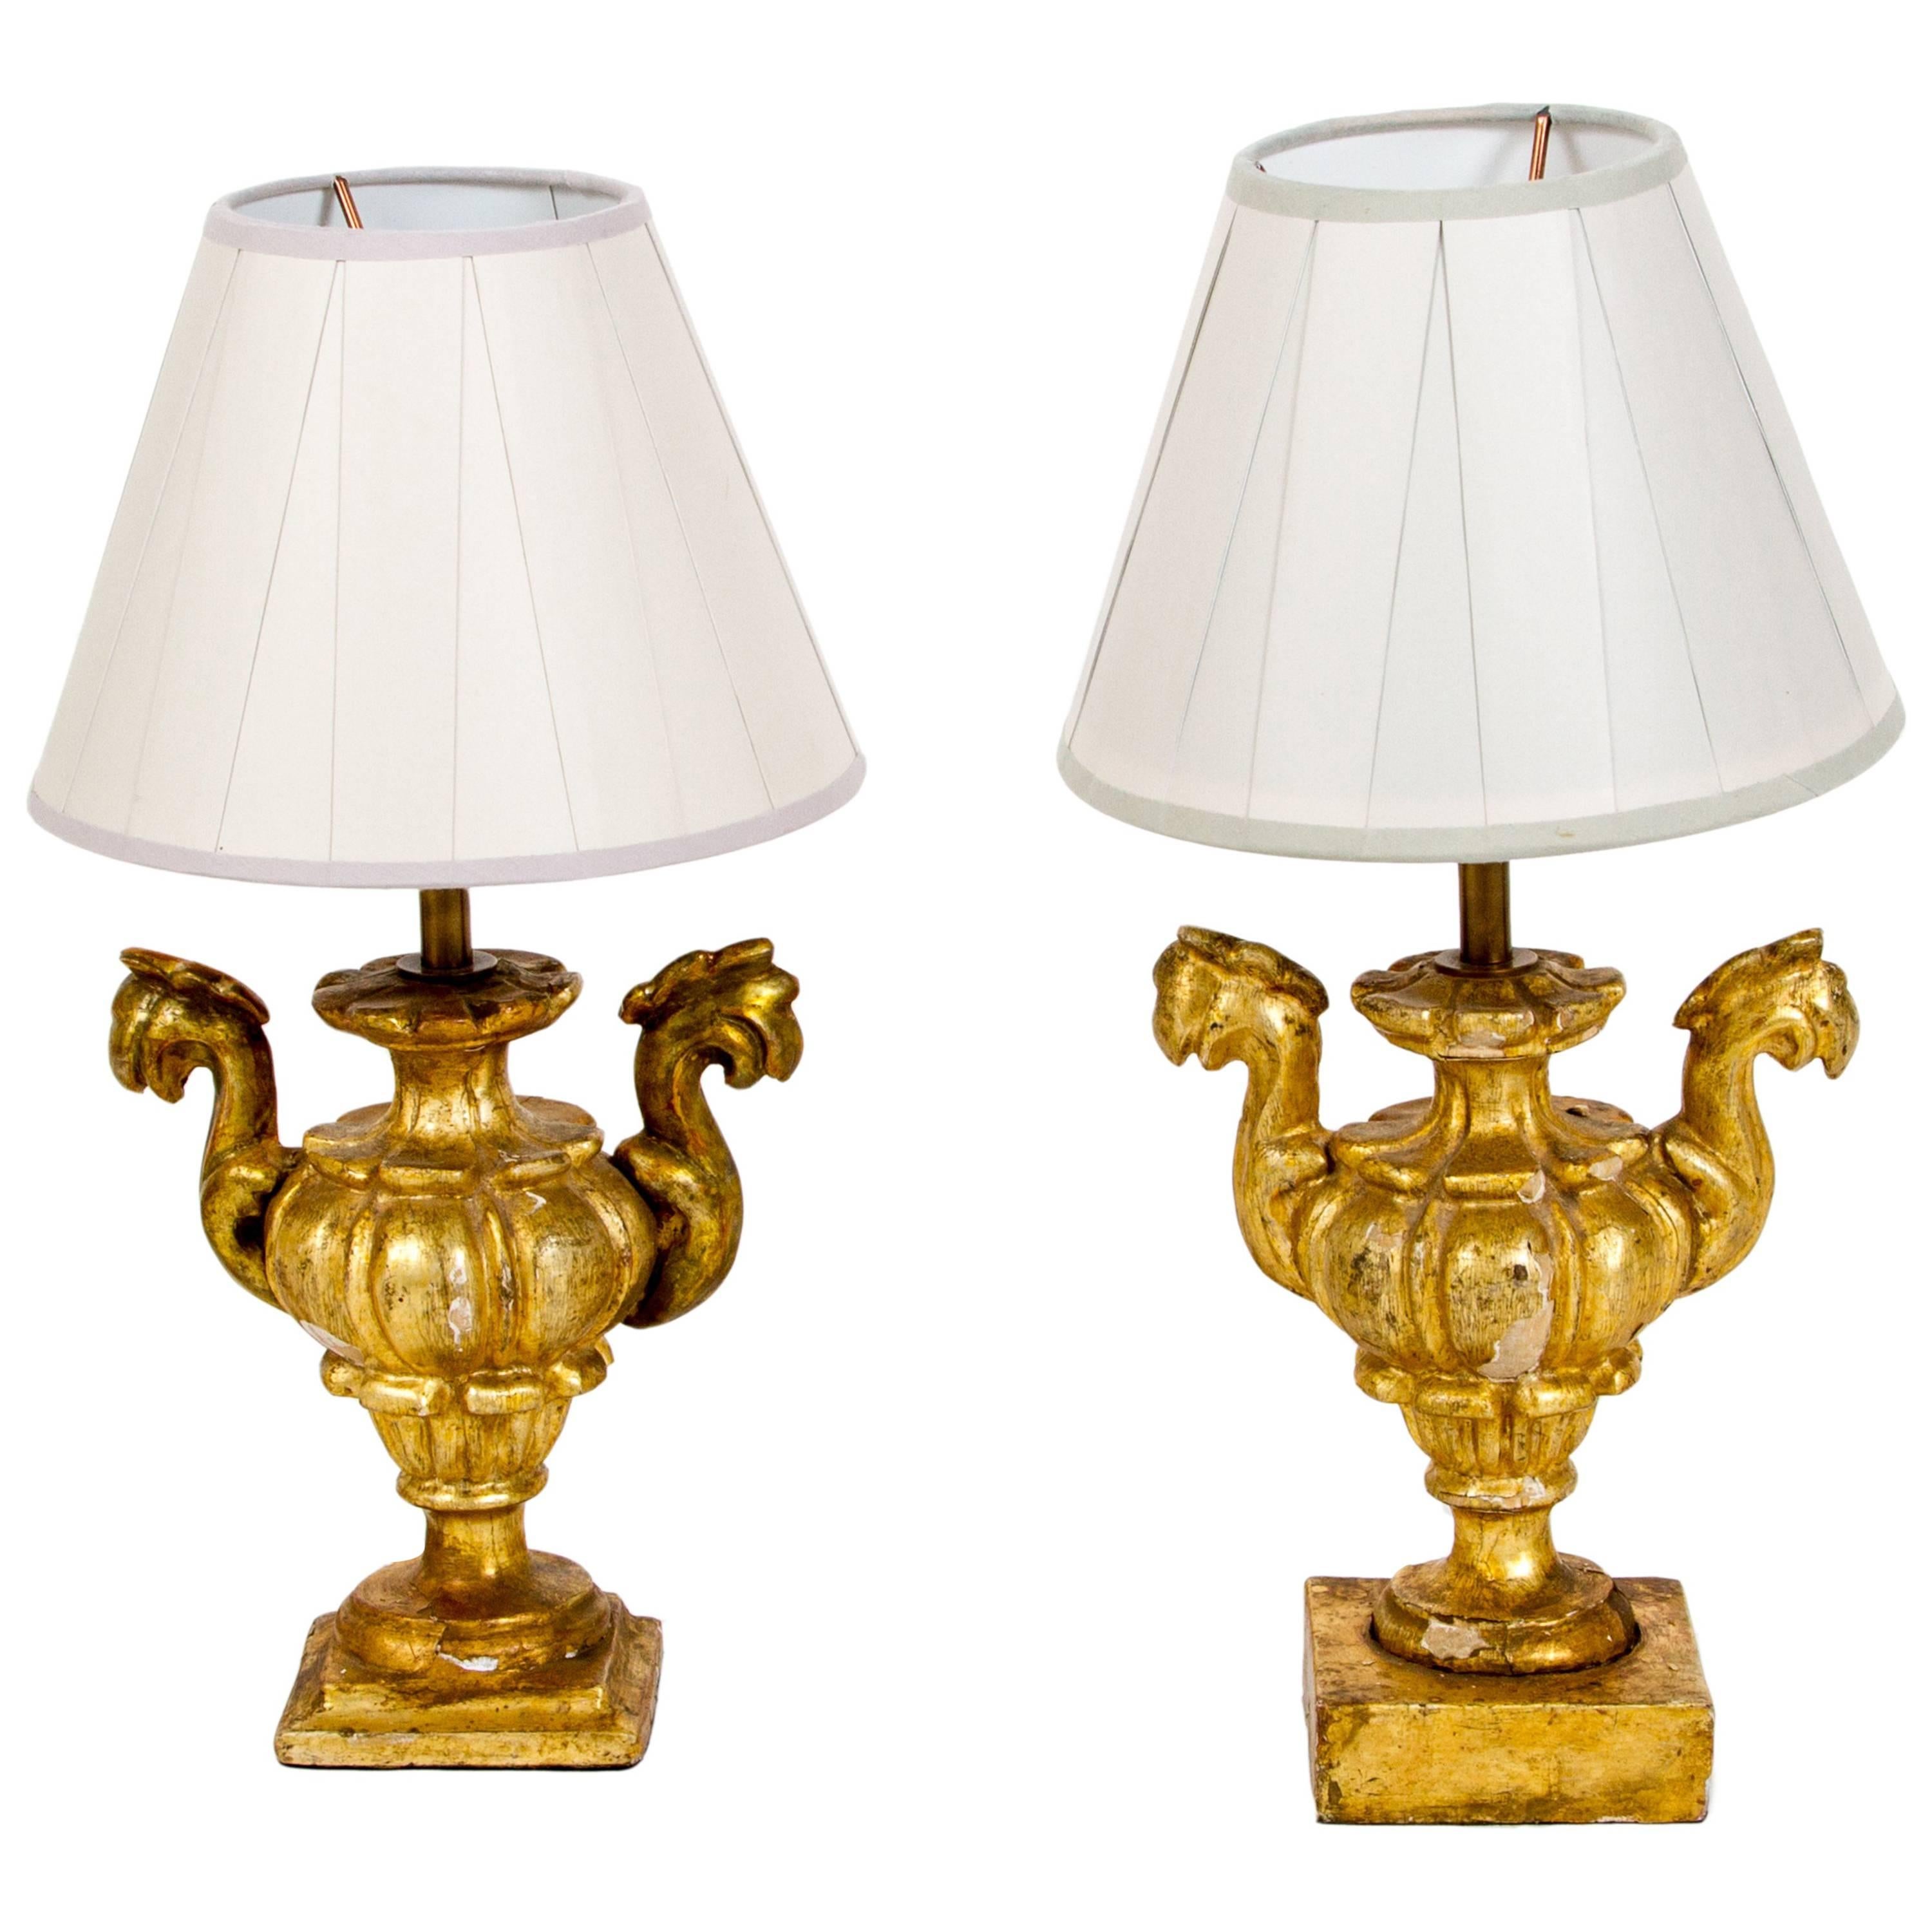 19th Century Pair of Italian Giltwood Lamps from Tuscany